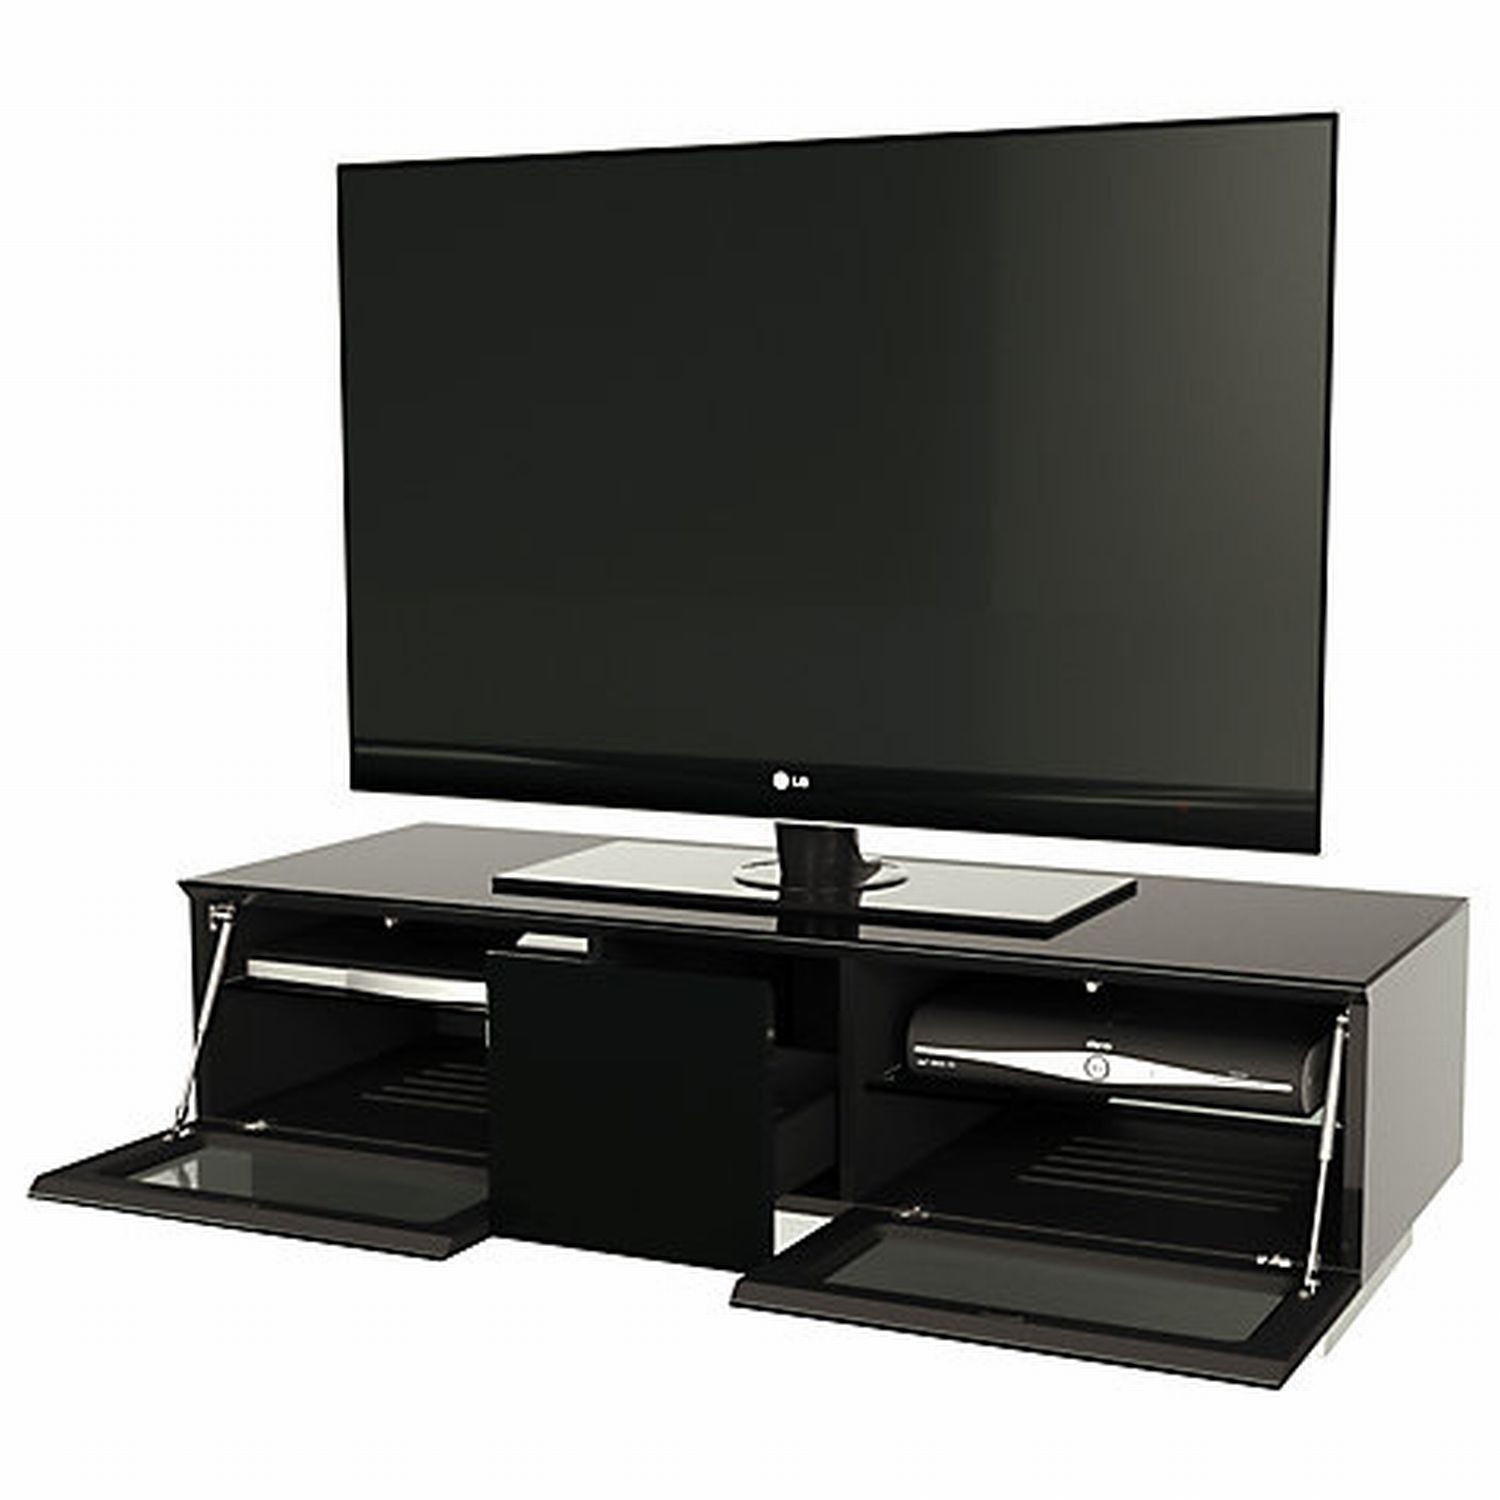 Casa Element High Gloss Tv Stand 1250 | Leekes With Regard To Tv Cabinet Gloss (View 8 of 15)